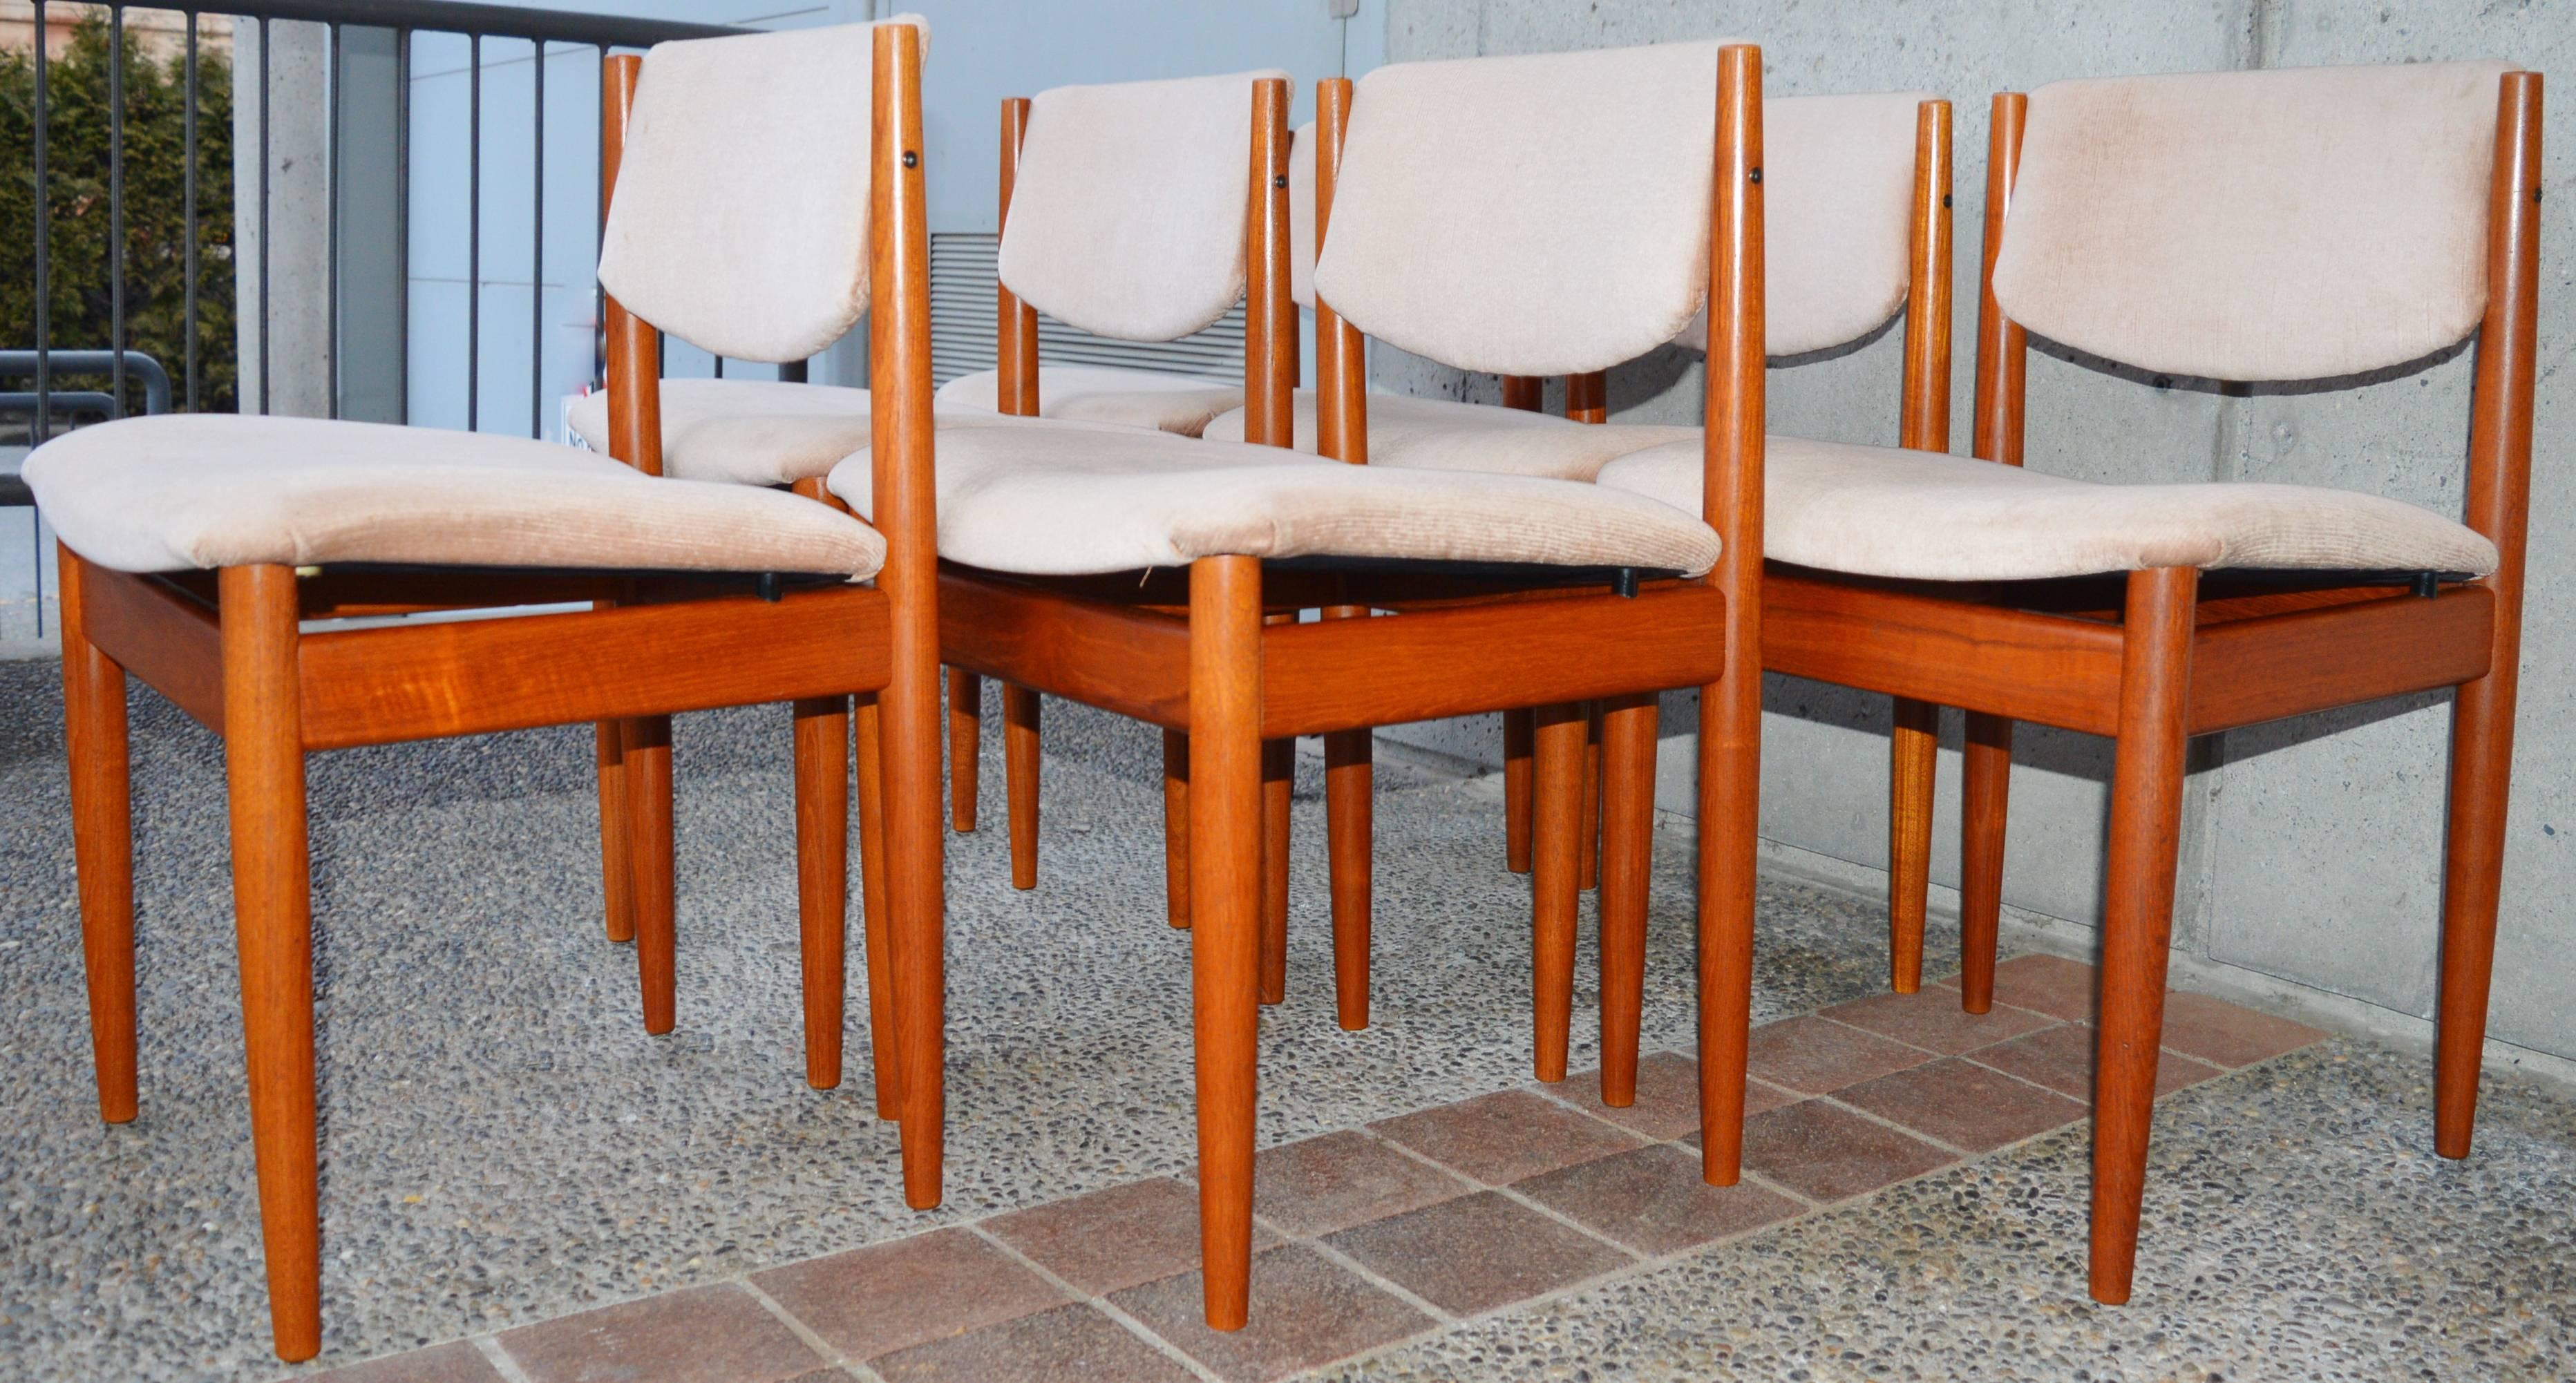 This gorgeous set of six dining chairs were designed by Finn Juhl and are one of the most comfortable dining chairs ever! The angle of the upholstered backrest is amazingly ergonomic in these model 197 chairs! The airy design features floating